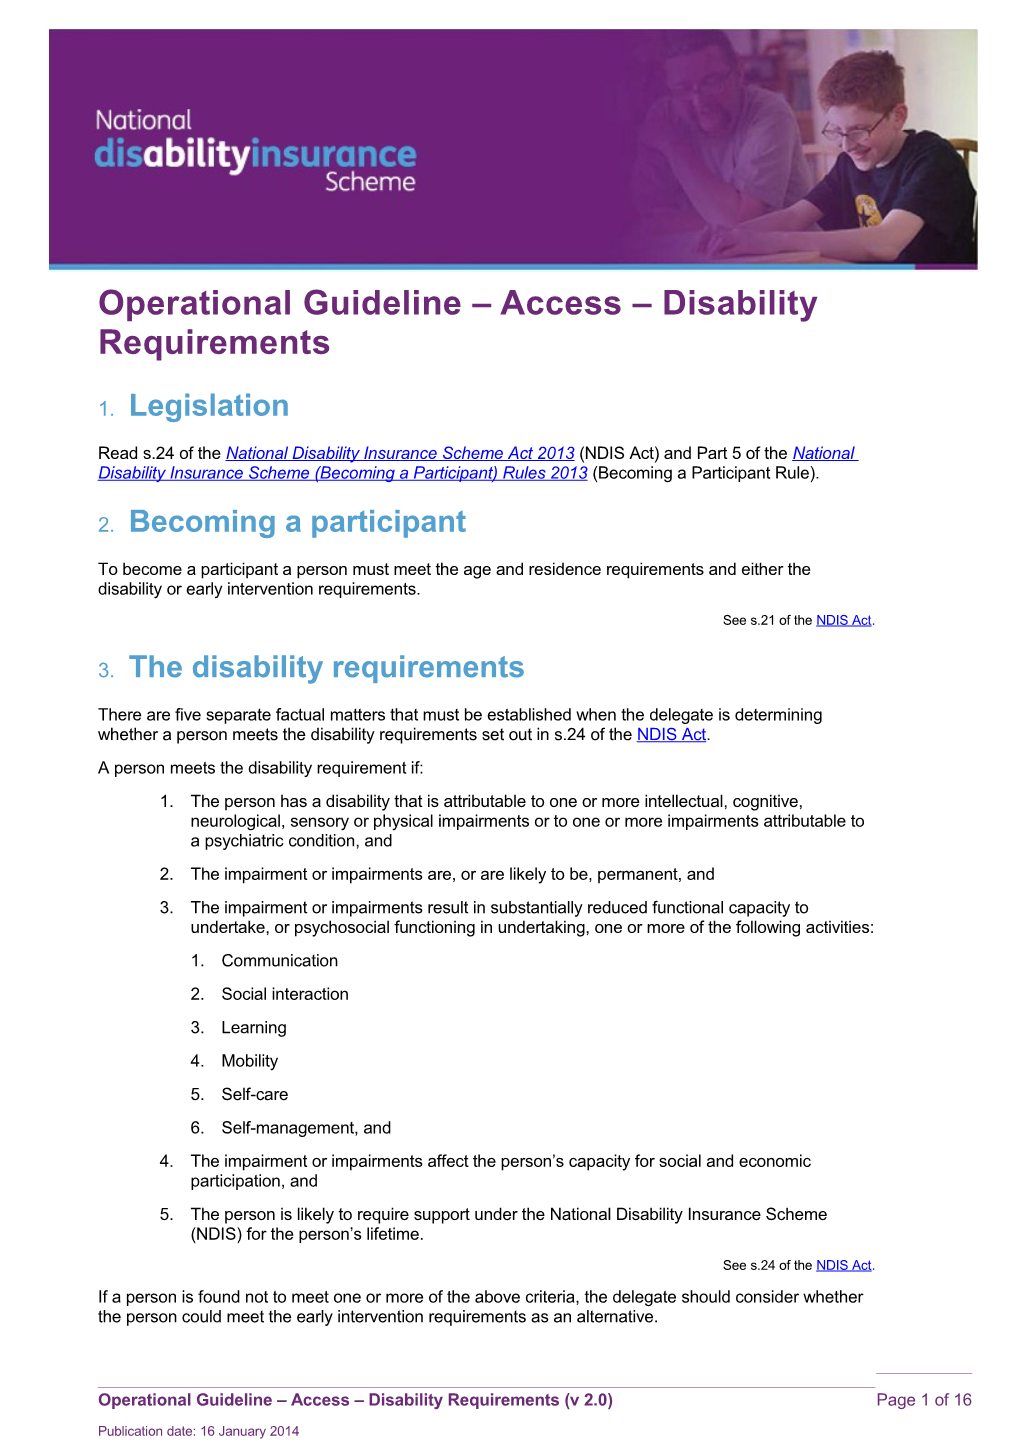 Access - Disability Requirements